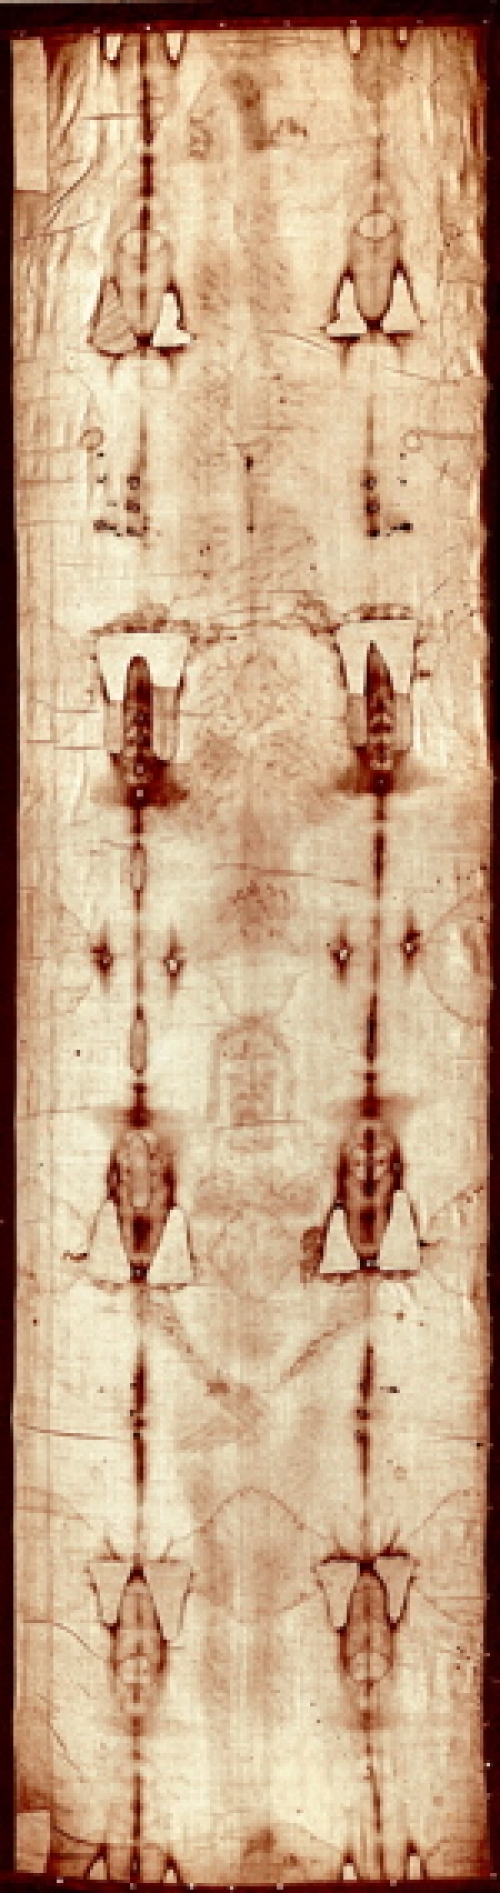 Public awaits 2010 viewing of Shroud of Turin